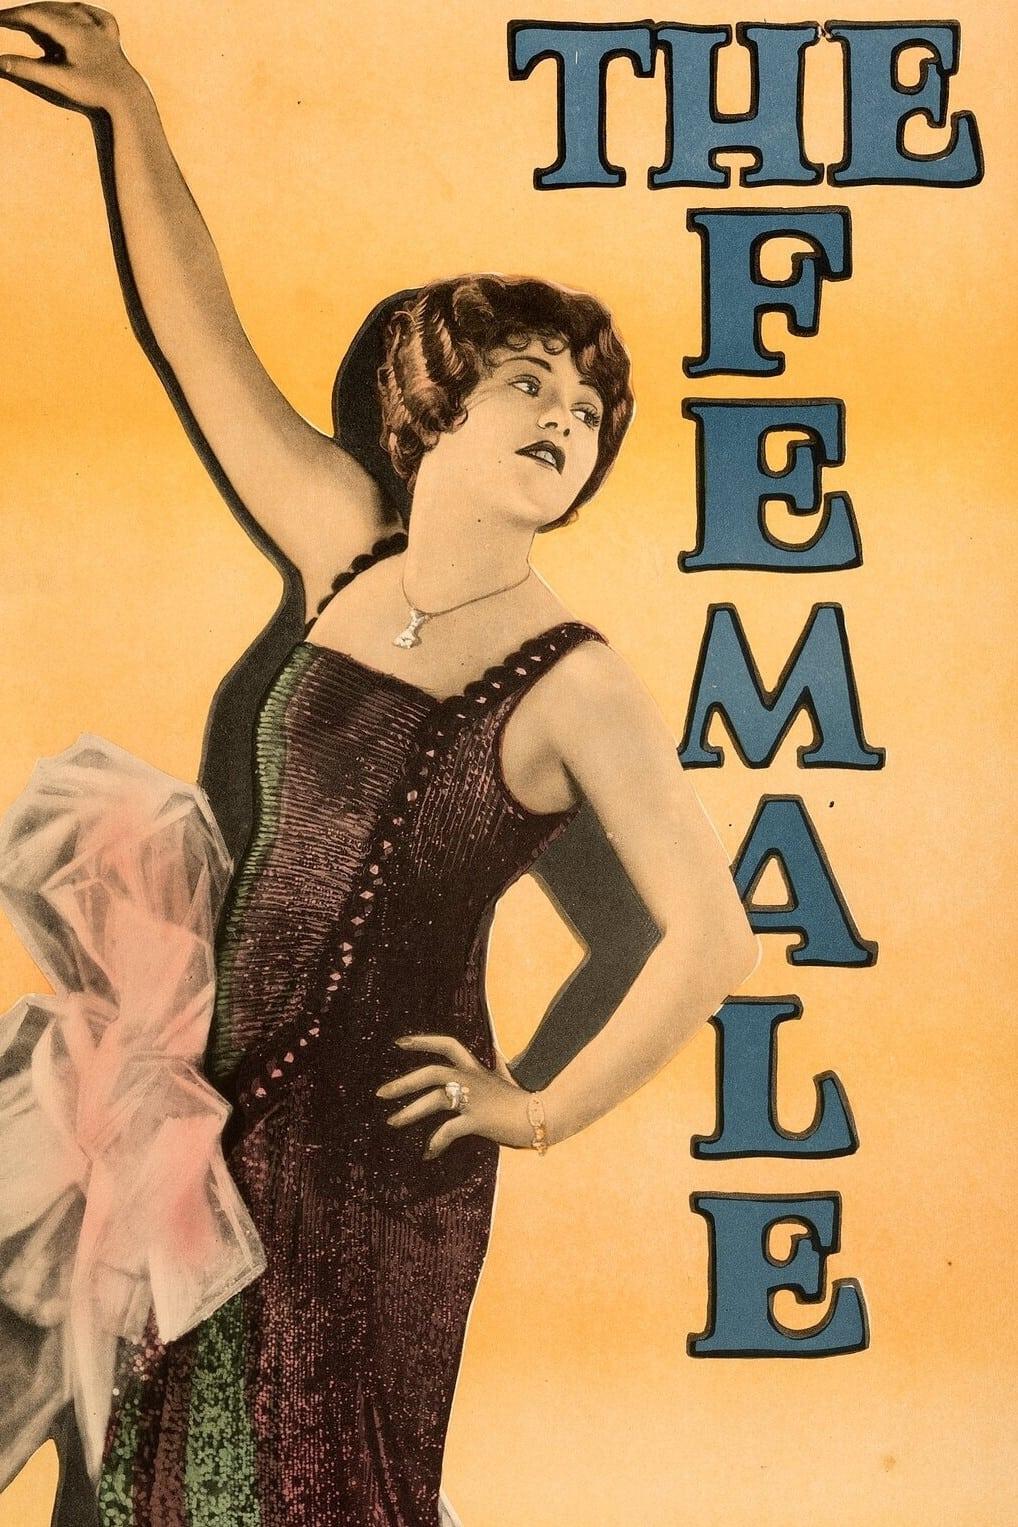 The Female poster